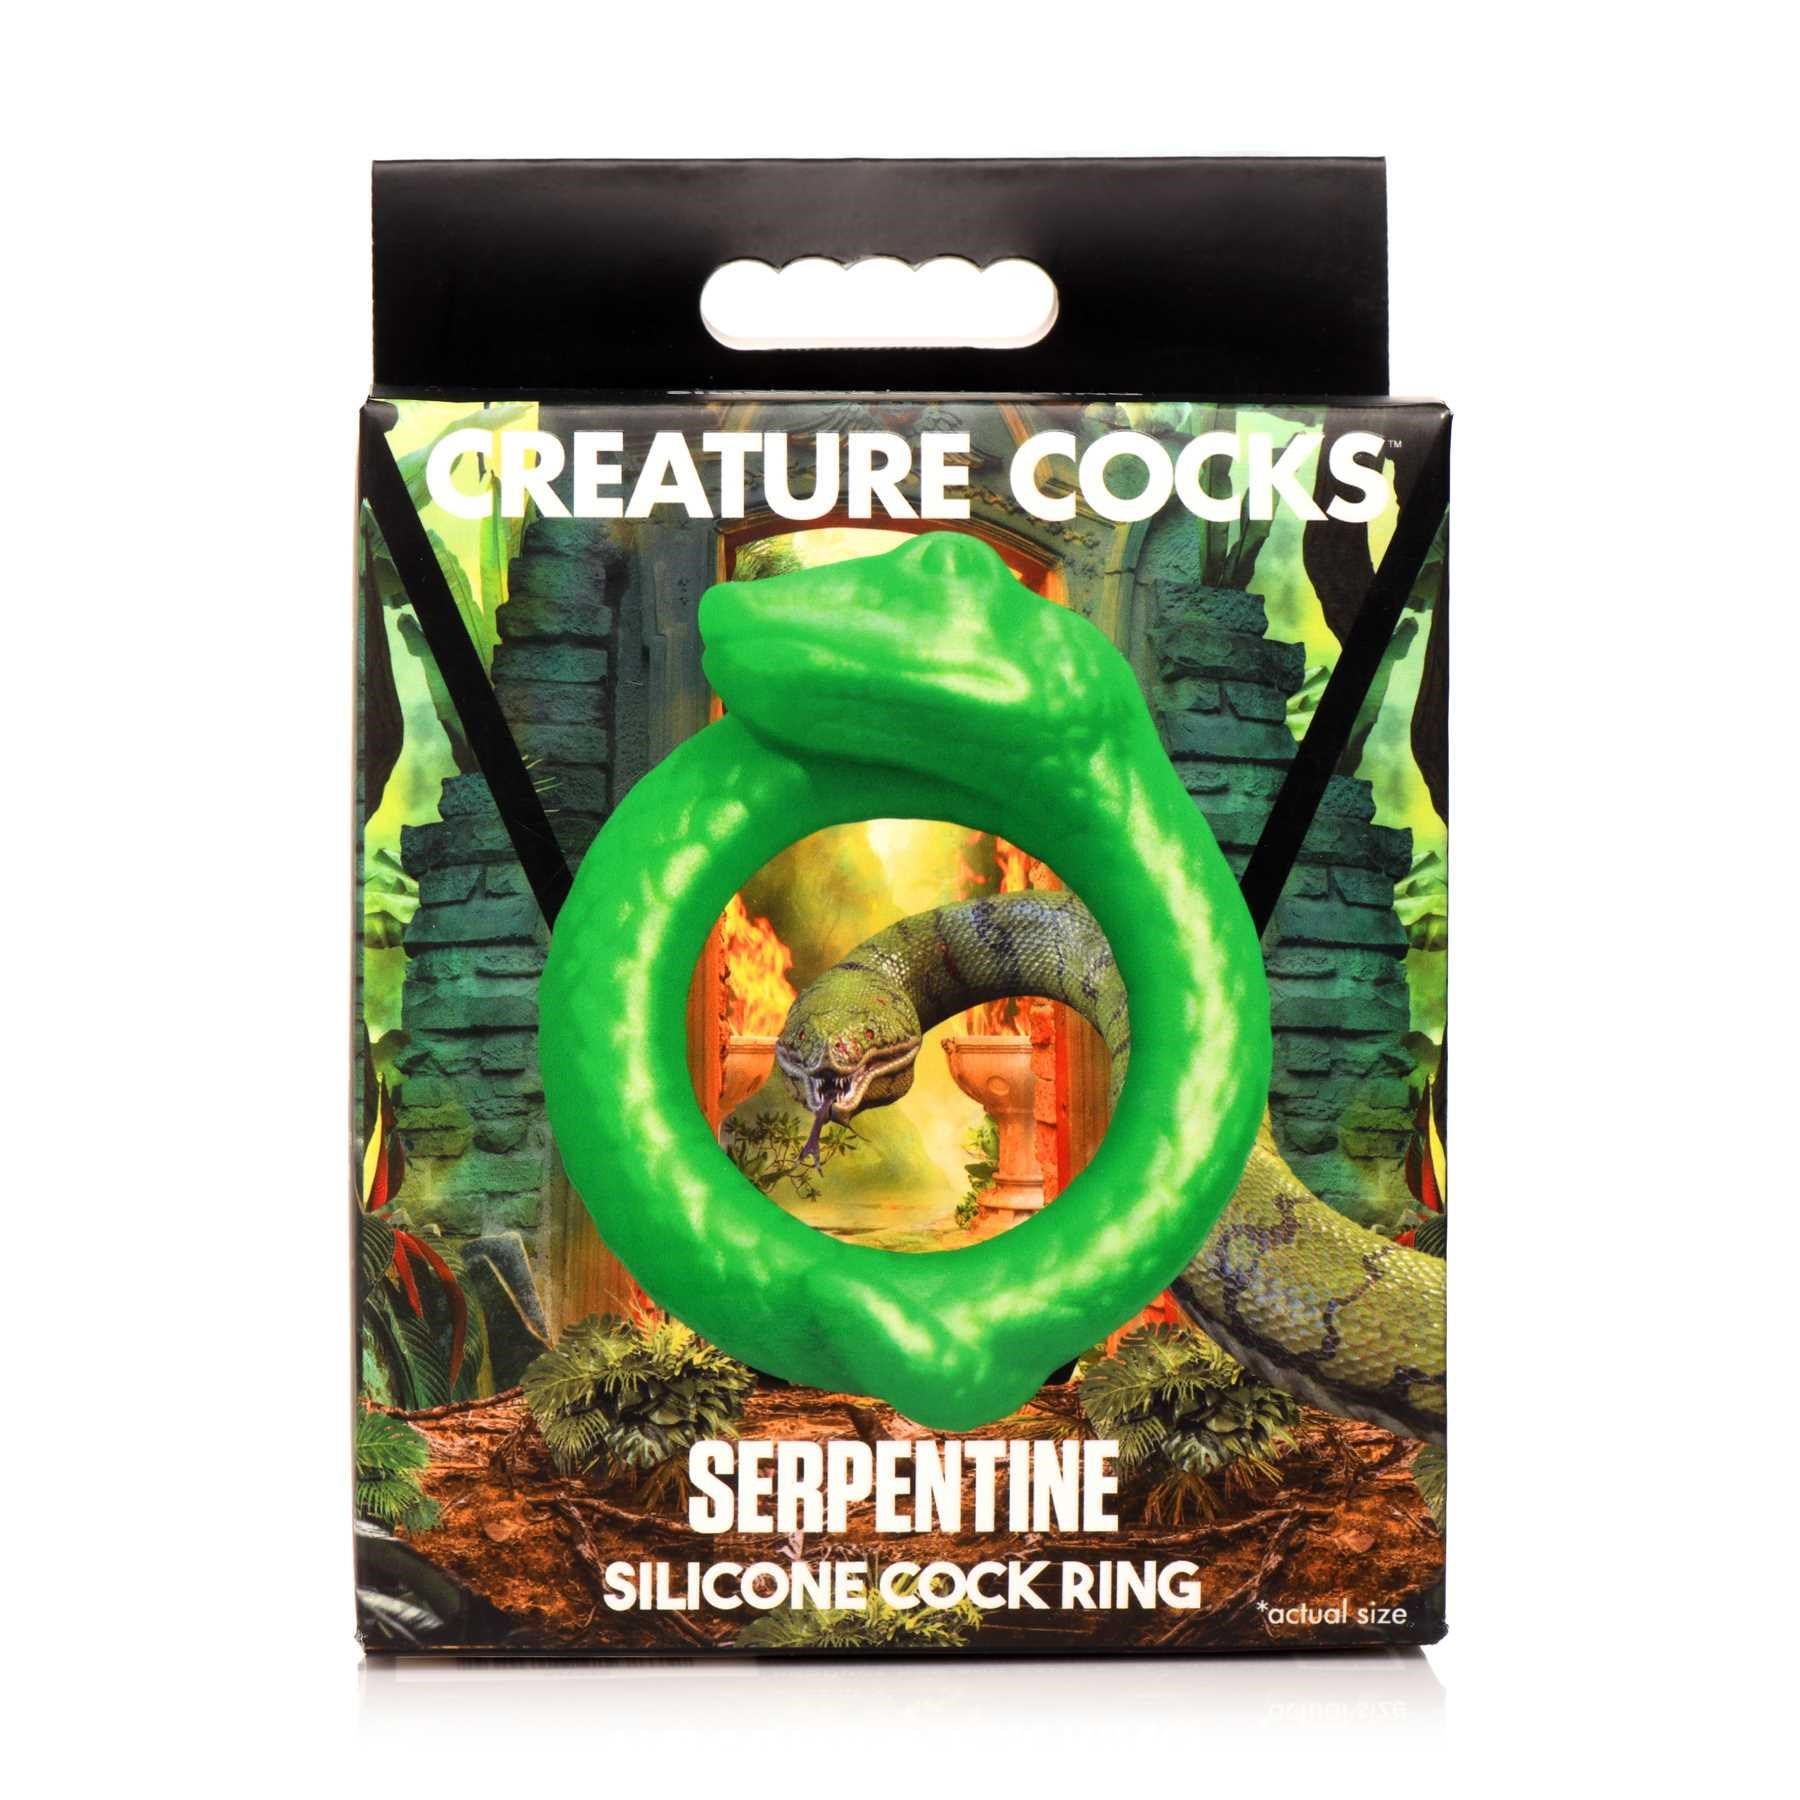 Creature Cocks Serpentine Silicone Cock Ring packaging